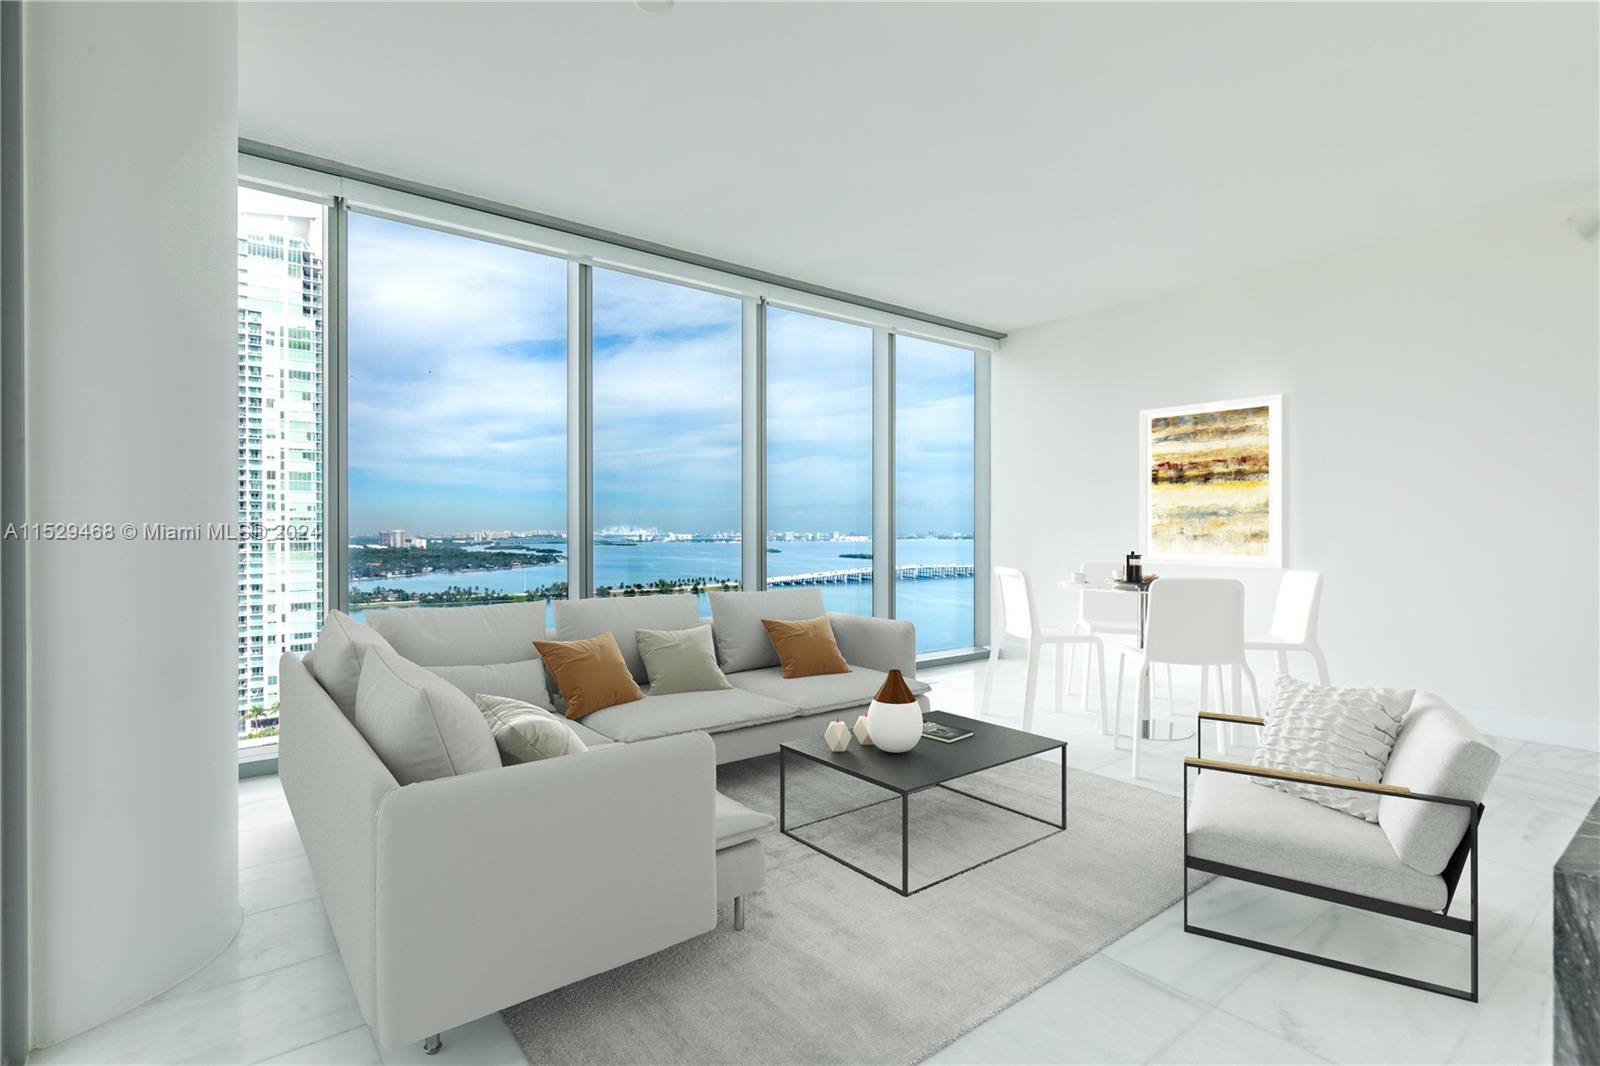 Luxury 2/2 Corner Unit at Missoni Baia Newest Luxury Tower in Edgewater.  100% finished with custom made closets and electric black outs and shades throughout the unit.  Enjoy breathtaking views of the Bay and the city, exclusive benefits for being a corner Unit.  Unit has Marble floors,  state-of-the-art-kitchen equipped with wolf and subzero appliances including a wine cooler,   floor to ceiling windows 10" tall, balcony 8" deep .  Amenities include 3 pools, tennis court, theater room, kids and teens room, pet spa salon, gym, yoga studio and more.  Missoni is a masterpiece of architecture and design inspired by the legendary fashion house of Missoni and developed by OKO Group.